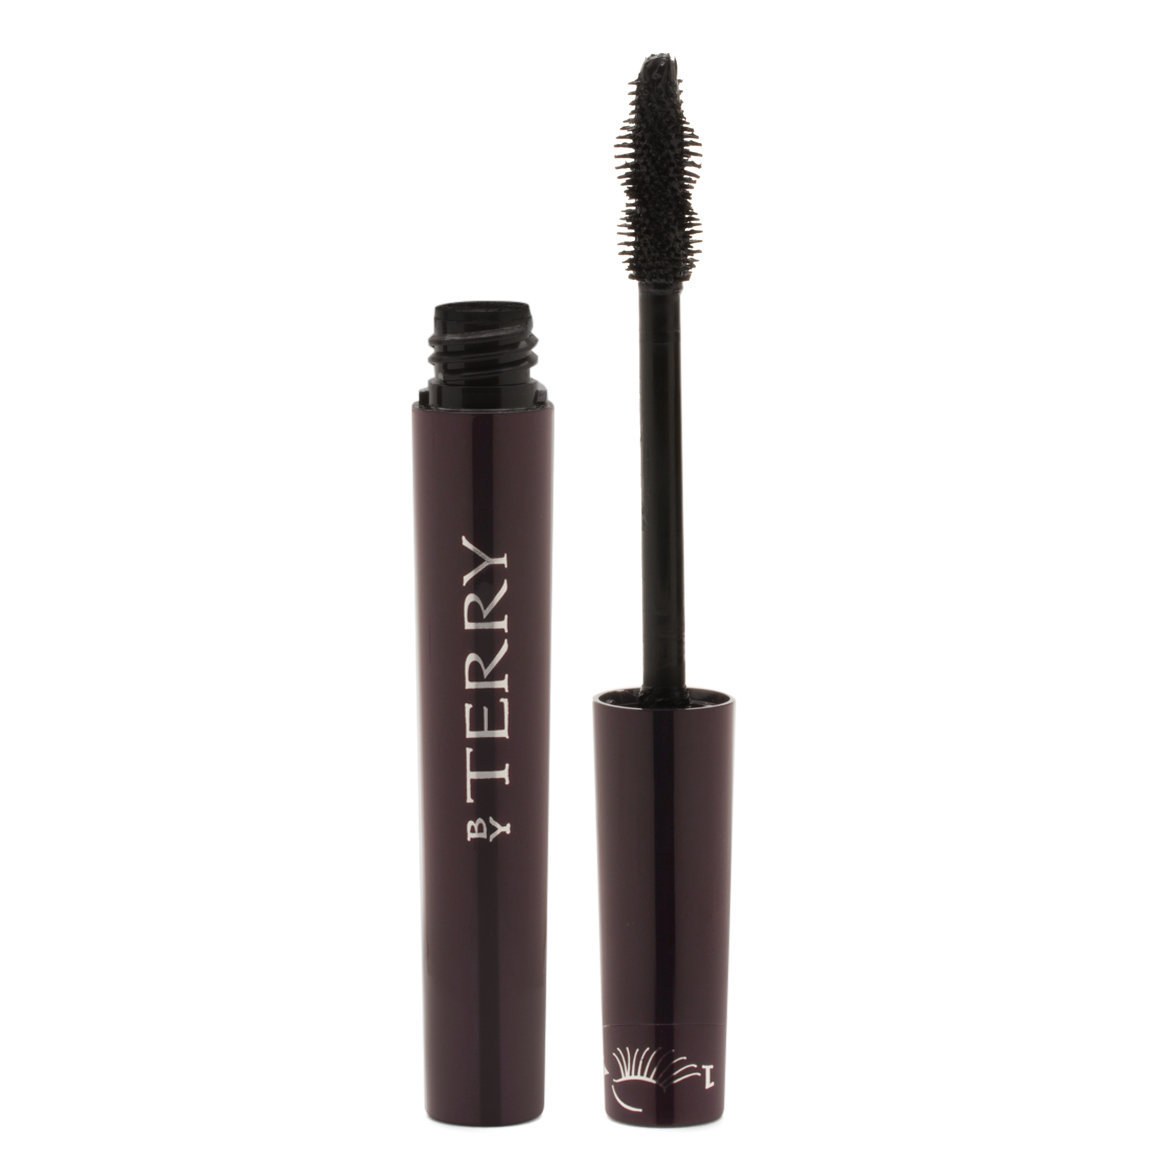 BY TERRY Lash-Expert Twist Brush alternative view 1 - product swatch.